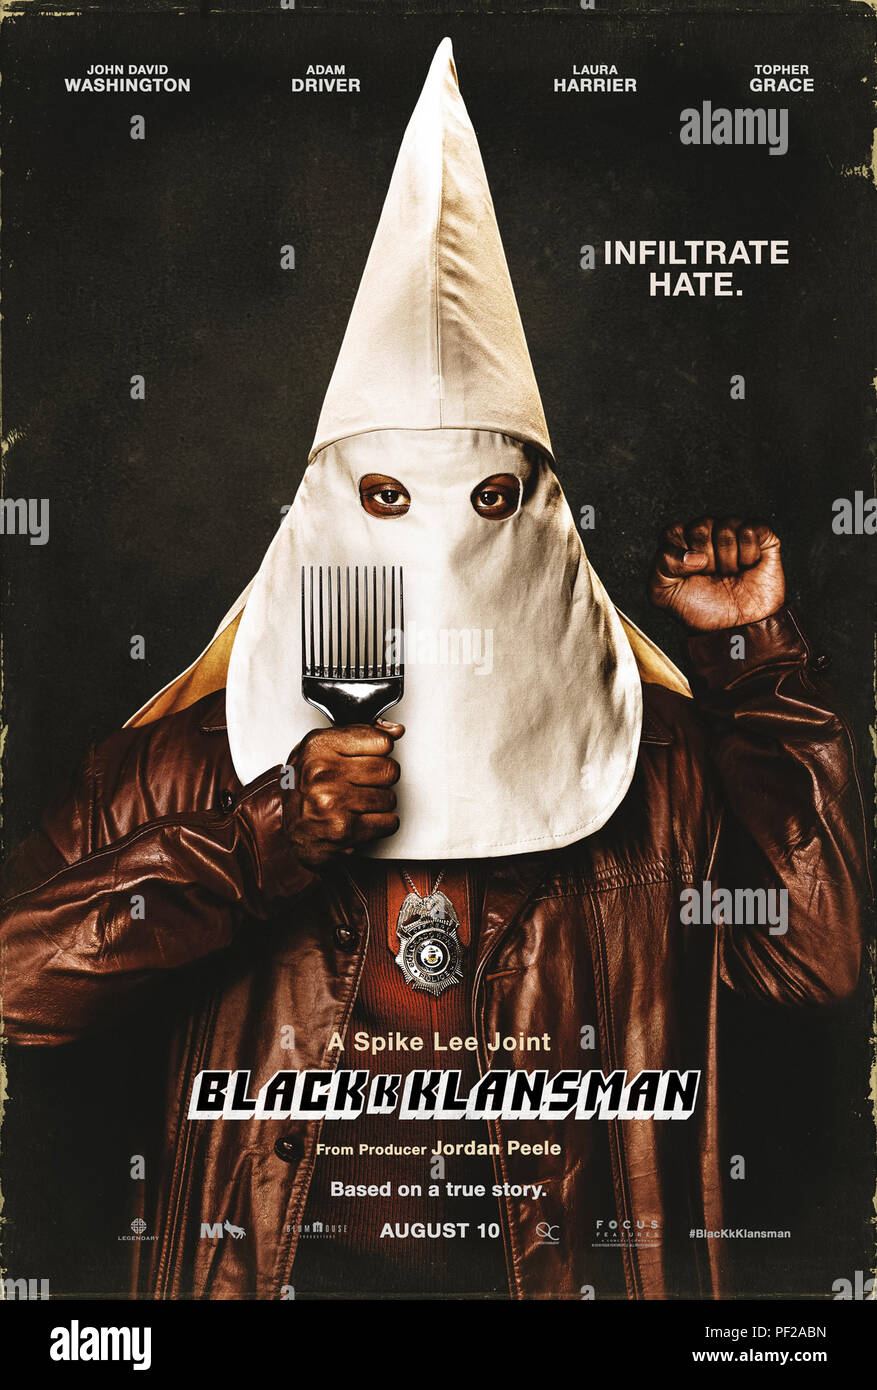 BlacKkKlansman (2018) directed by Spike Lee and staring John David Washington, Adam Driver, Laura Harrier and Alec Baldwin. The true story of Ron Stallworth, an African-American police officer who with the help of a colleague infiltrates the local chapter of the Ku Klux Klan in Colorado. Stock Photo